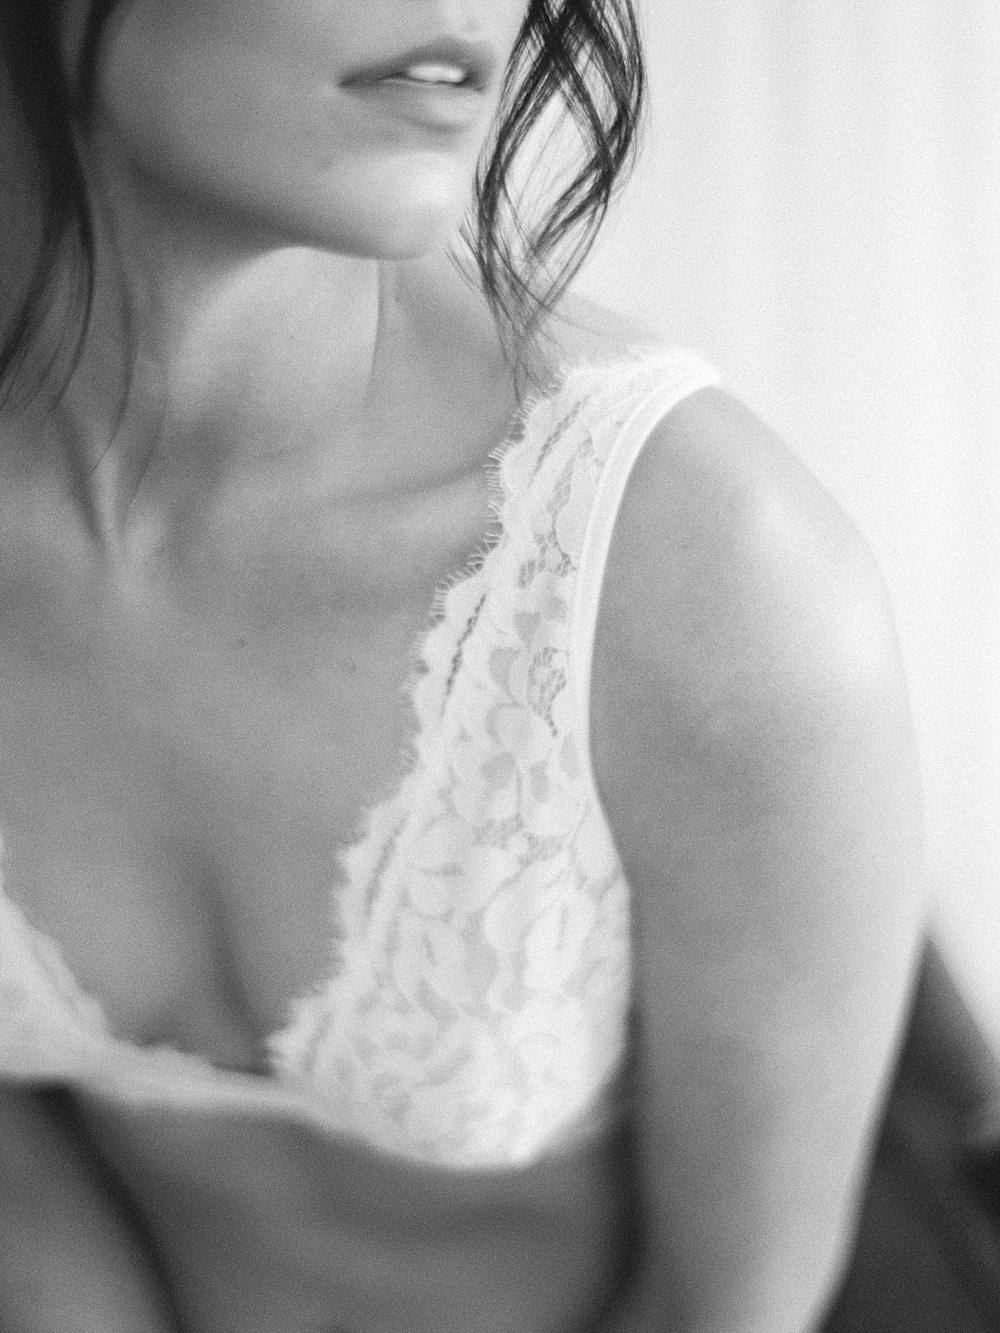 charleston sc boudoir portrait on kodak black and white 35mm film with bride in white lace bra and panties lingerie by brian d smith